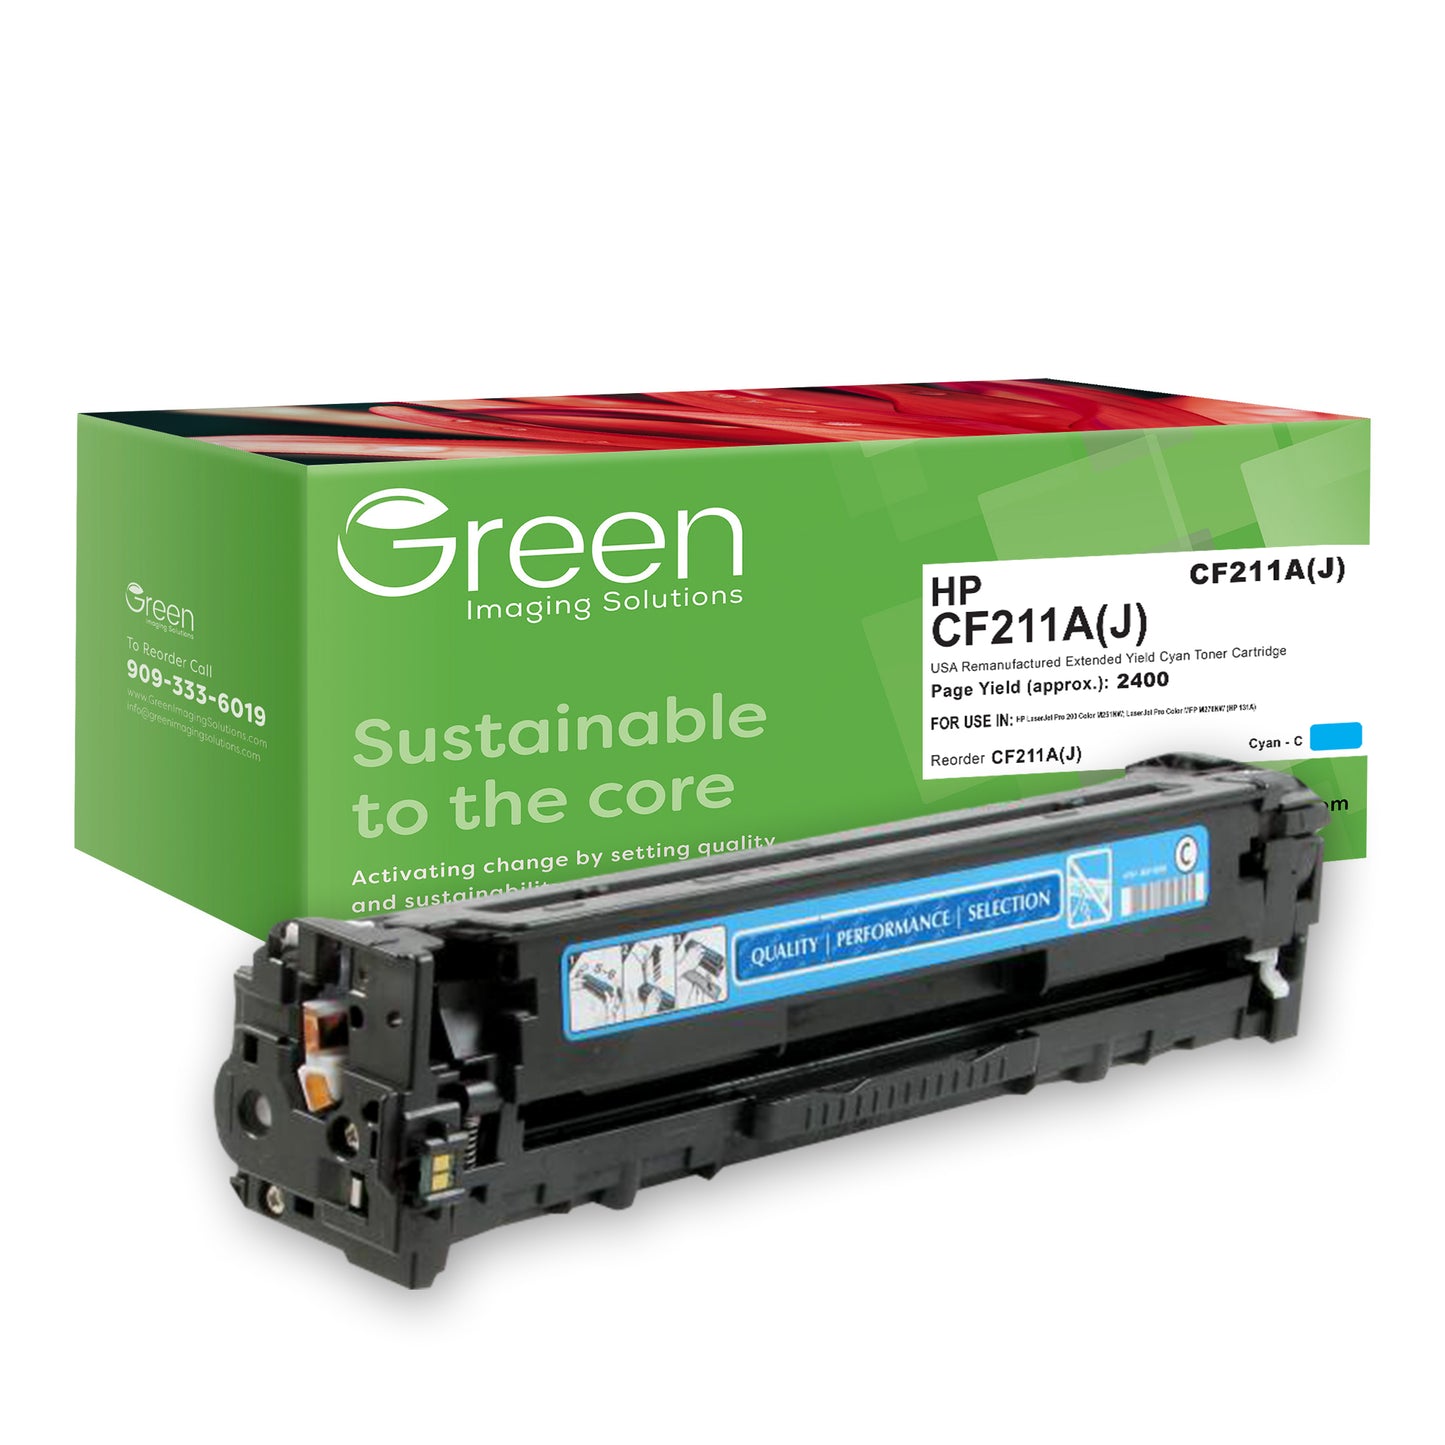 GIS USA Remanufactured Extended Yield Cyan Toner Cartridge for HP CF211A (HP 131A)